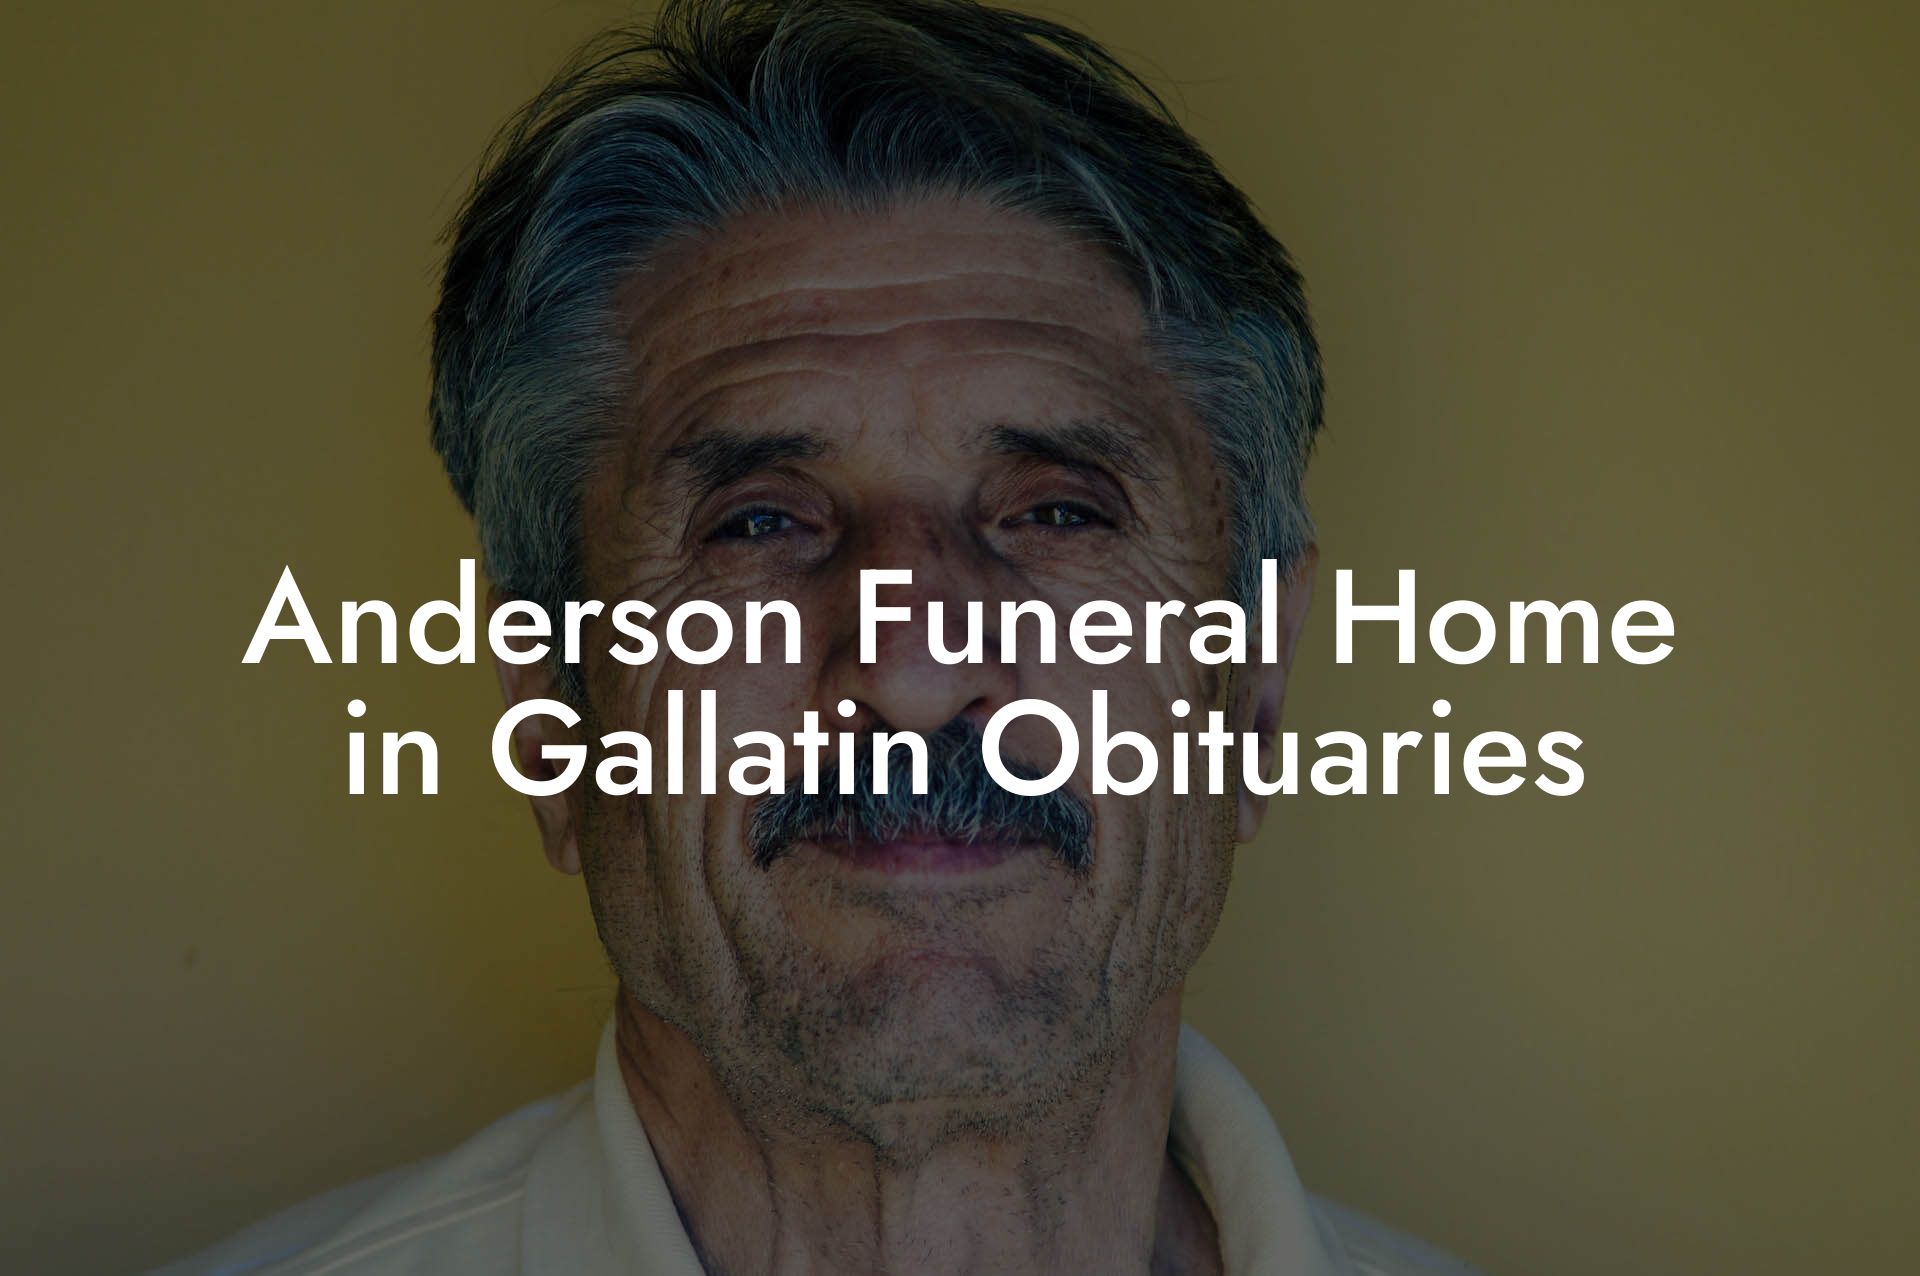 Anderson Funeral Home in Gallatin Obituaries